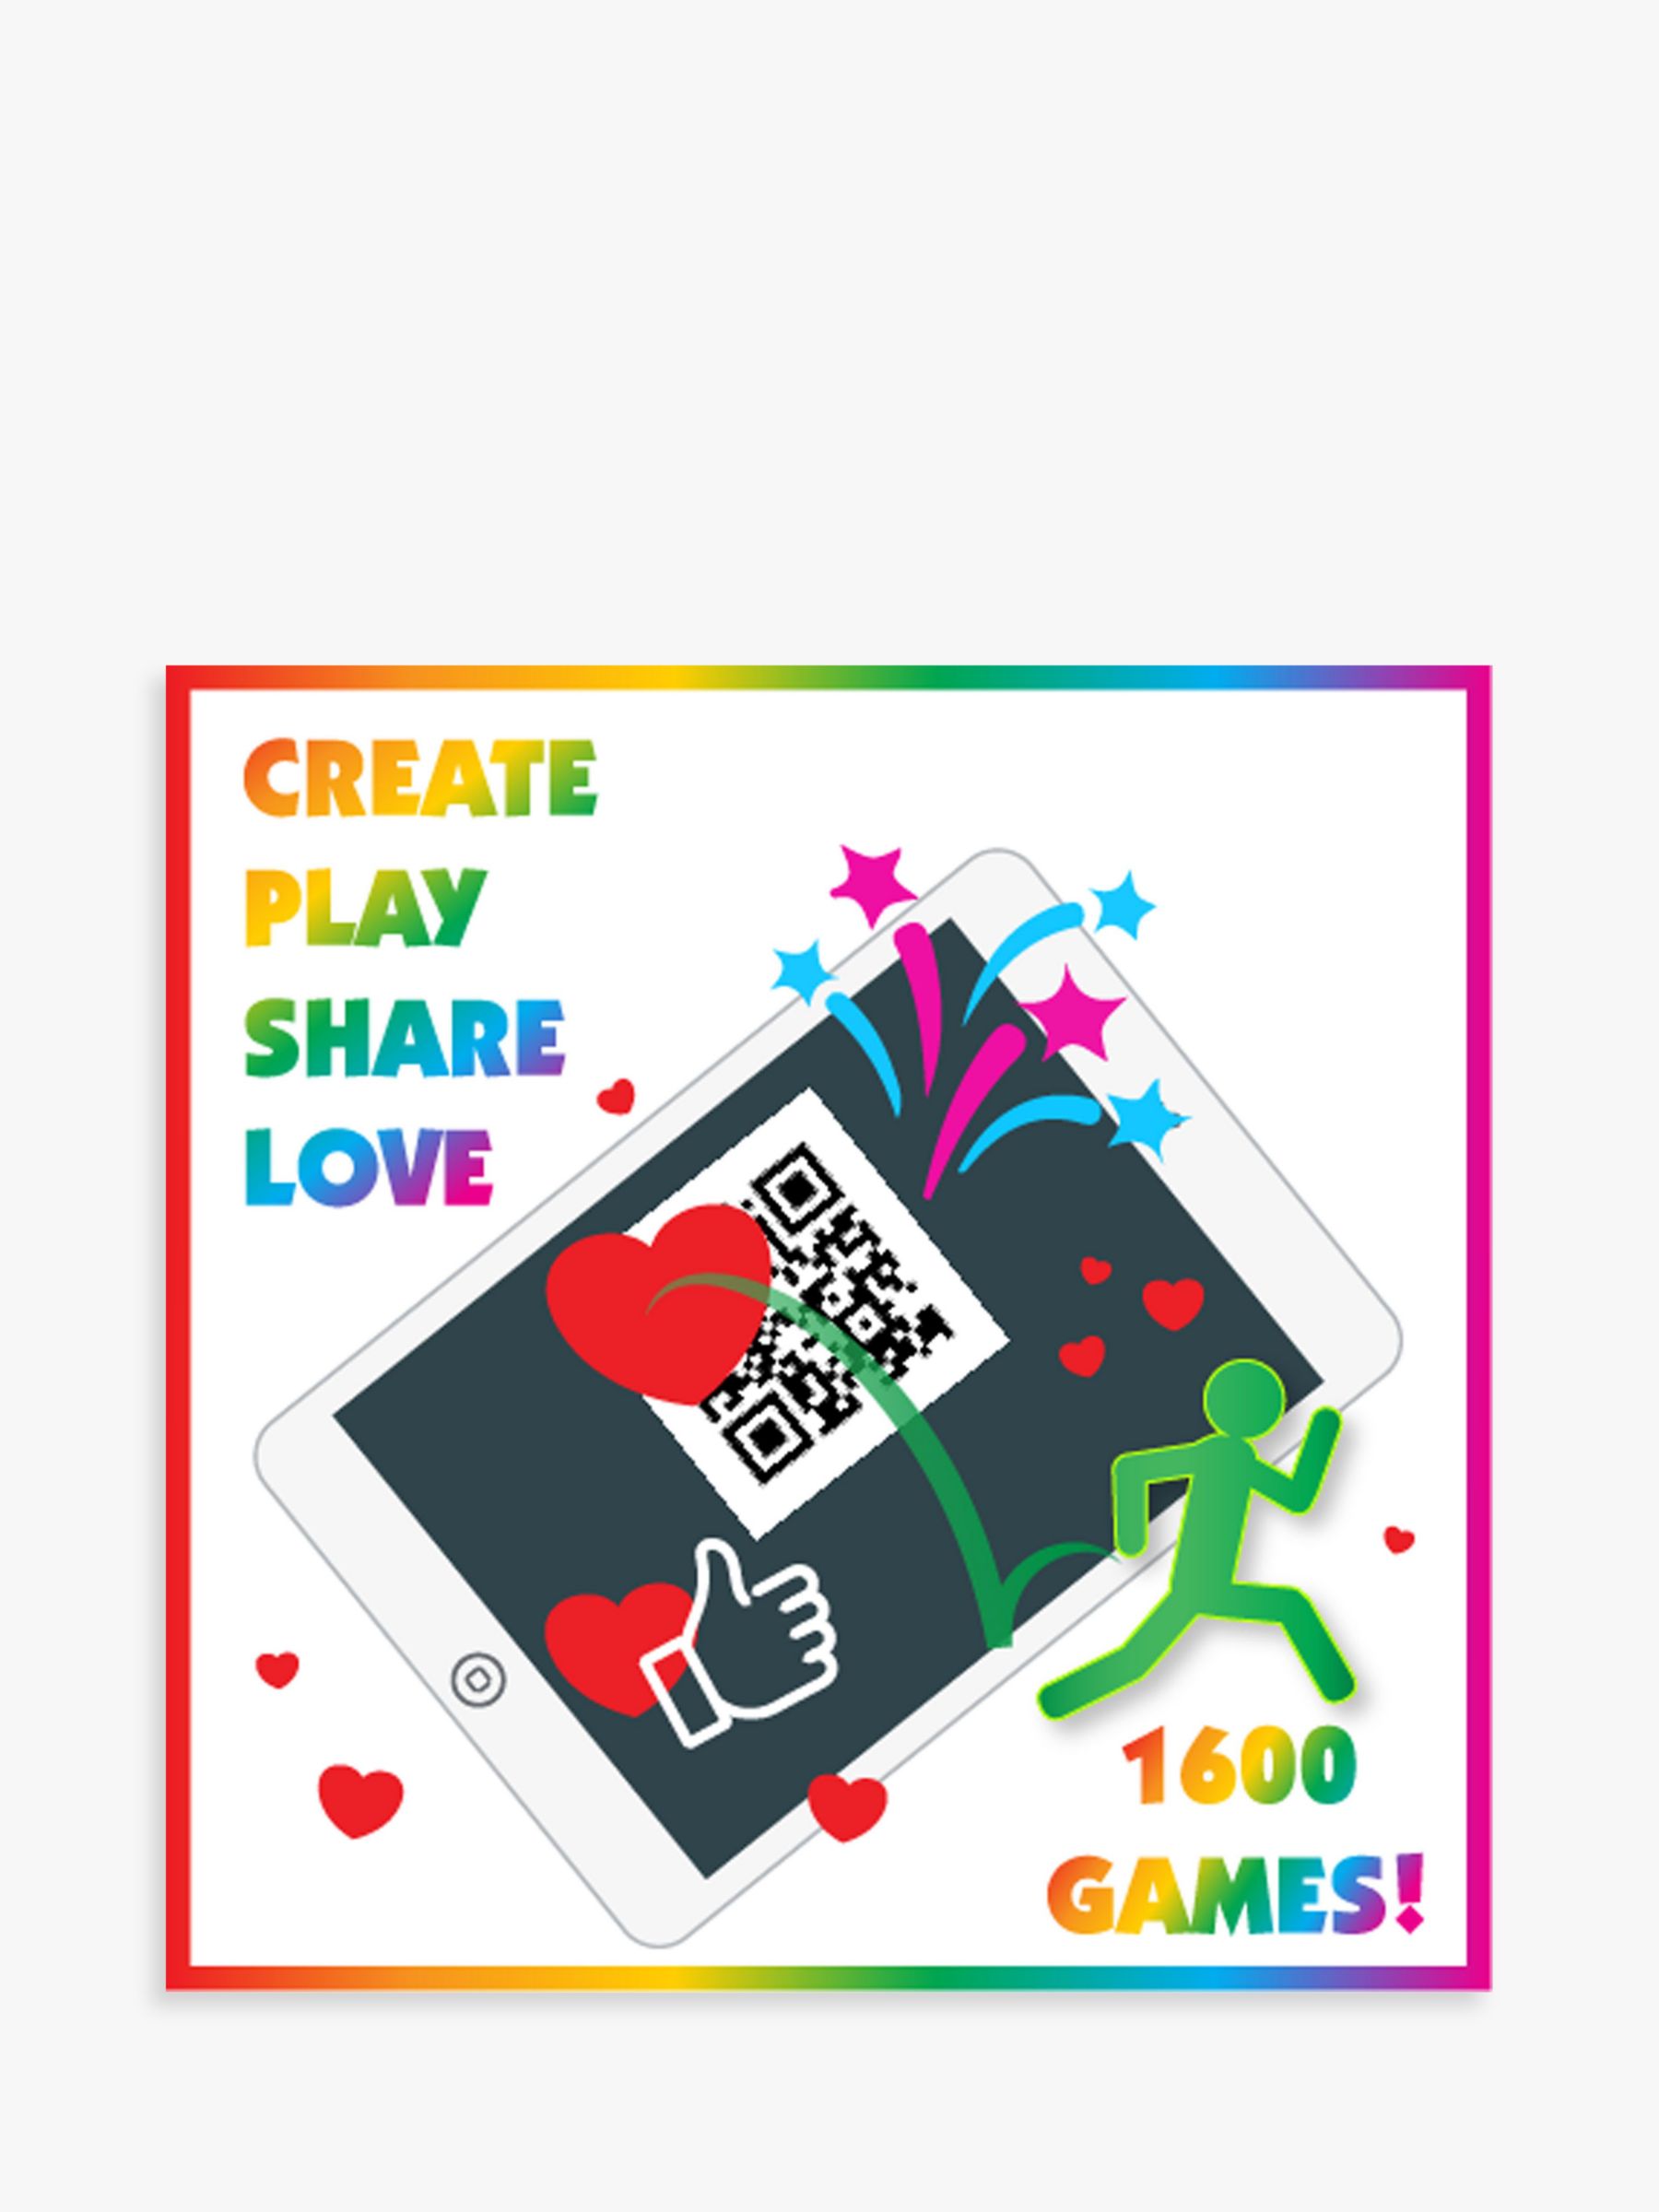 Mobile Game Maker by Pixicade at Fleet Farm